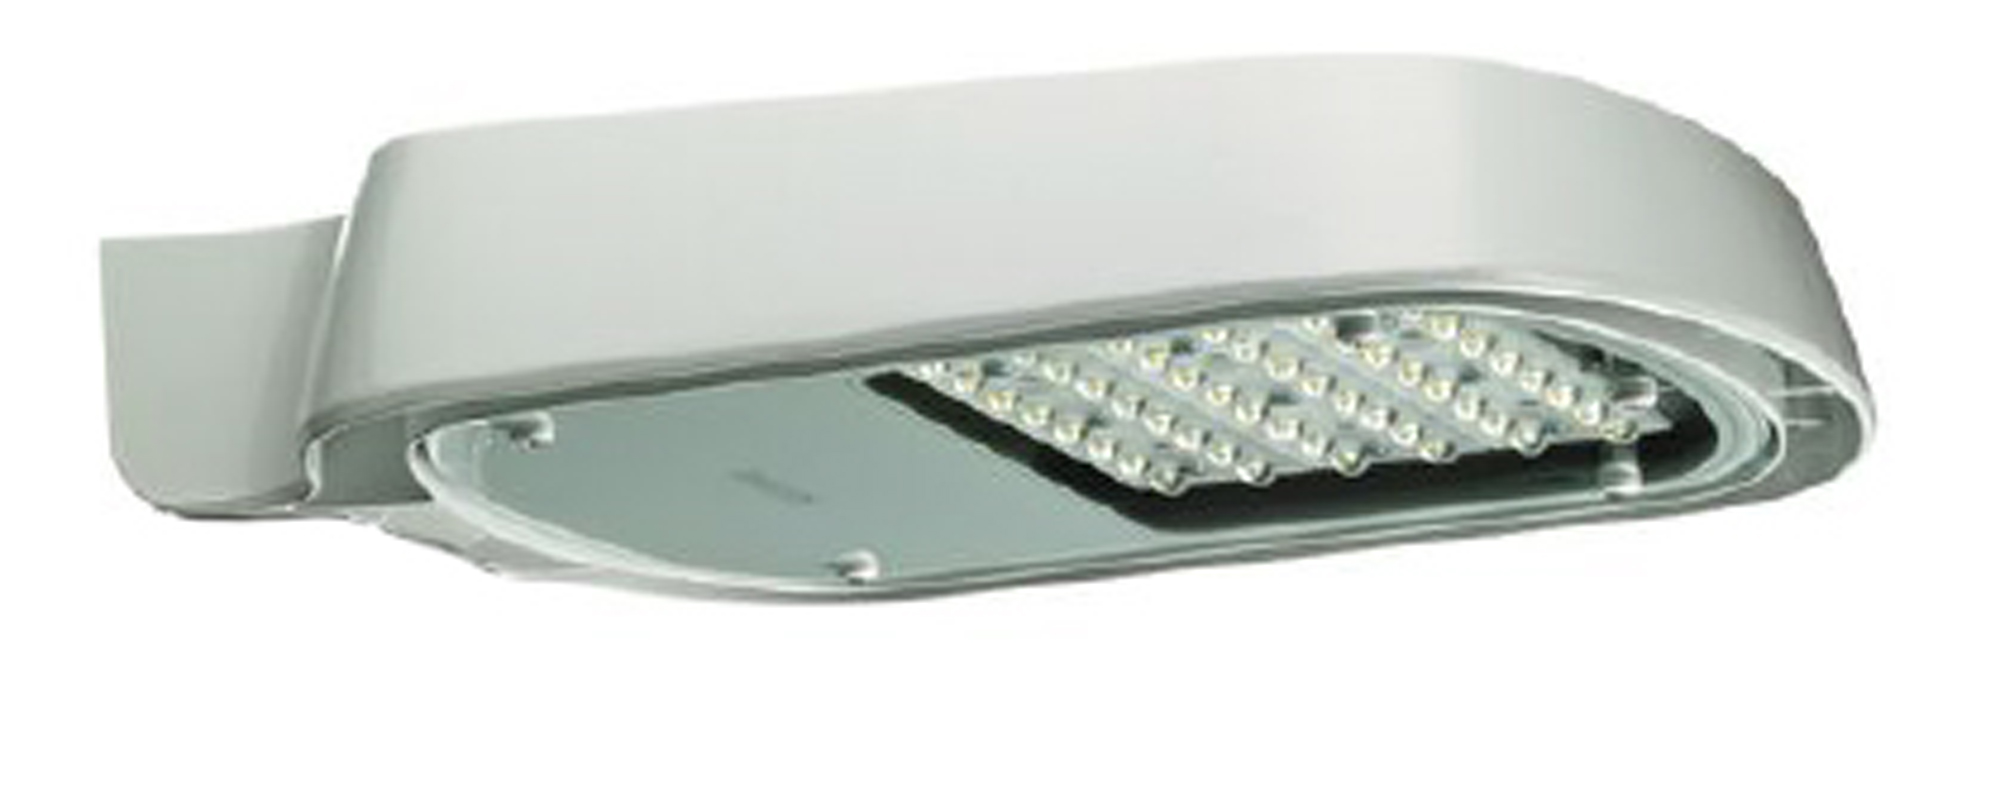 Philips LED Mastleuchte ClearWay BGP307 LED120/740 78 Watt  DX Zopfmaß 76 /Red 48 TOTAL